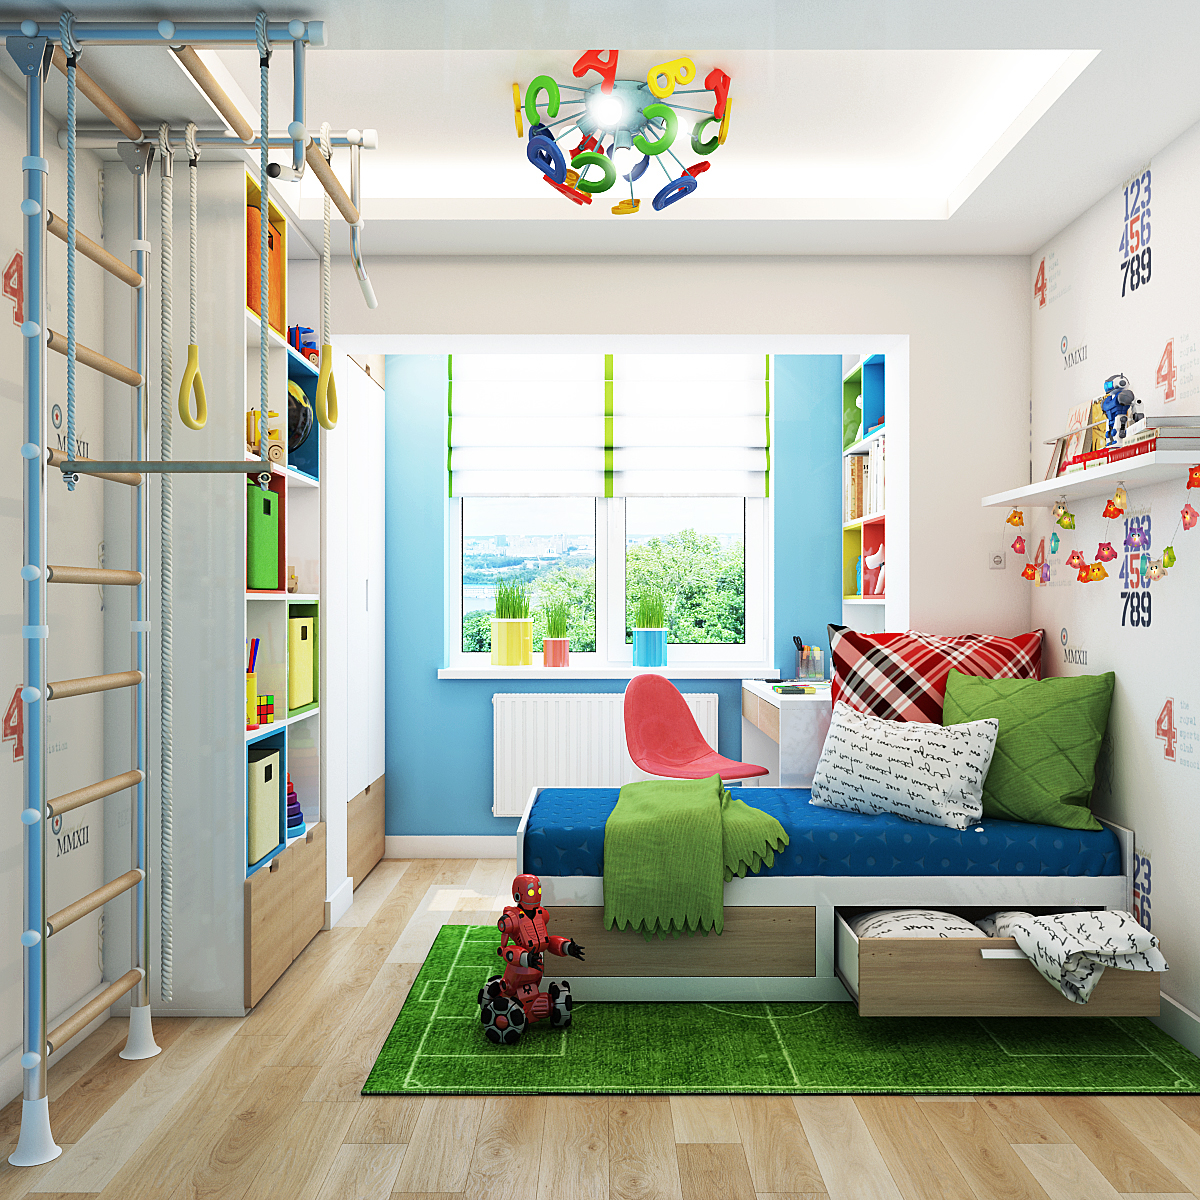 charming children's room "width =" 1200 "height =" 1200 "srcset =" https://mileray.com/wp-content/uploads/2020/05/1588509051_960_Creative-and-Innovative-Way-To-Decor-Kids-Room-Designs-Which.jpg 1200w, https: // myfashionos. com / wp-content / uploads / 2016/10 / Евгения-Анфилова-2-150x150.jpg 150w, https://mileray.com/wp-content/uploads/2016/10/Евгения-Анфилова-2-300x300.jpg 300w, https://mileray.com/wp-content/uploads/2016/10/Евгения-Анфилова-2-768x768.jpg 768w, https://mileray.com/wp-content/uploads/2016/10/Евгения -Анфилова-2-1024x1024.jpg 1024w, https://mileray.com/wp-content/uploads/2016/10/Евгения-Анфилова-2-696x696.jpg 696w, https://mileray.com/wp-content /uploads/2016/10/Евгения-Анфилова-2-1068x1068.jpg 1068w, https://mileray.com/wp-content/uploads/2016/10/Евгения-Анфилова-2-420x420.jpg 420w "sizes =" (maximum width: 1200px) 100vw, 1200px